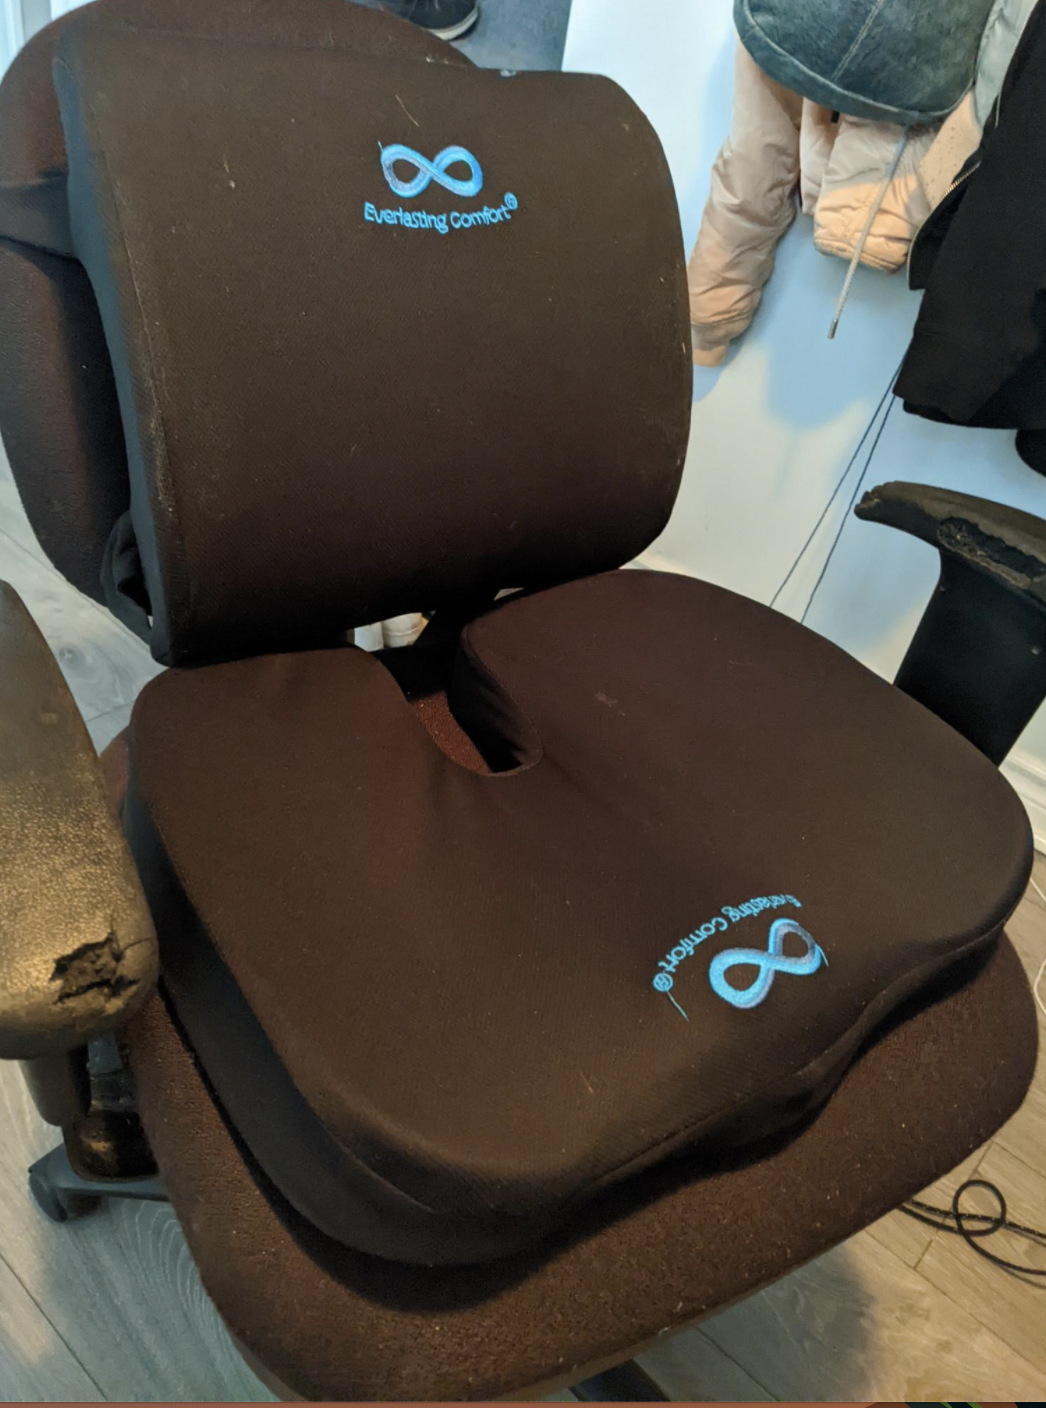 The seat cushion set on an office chair